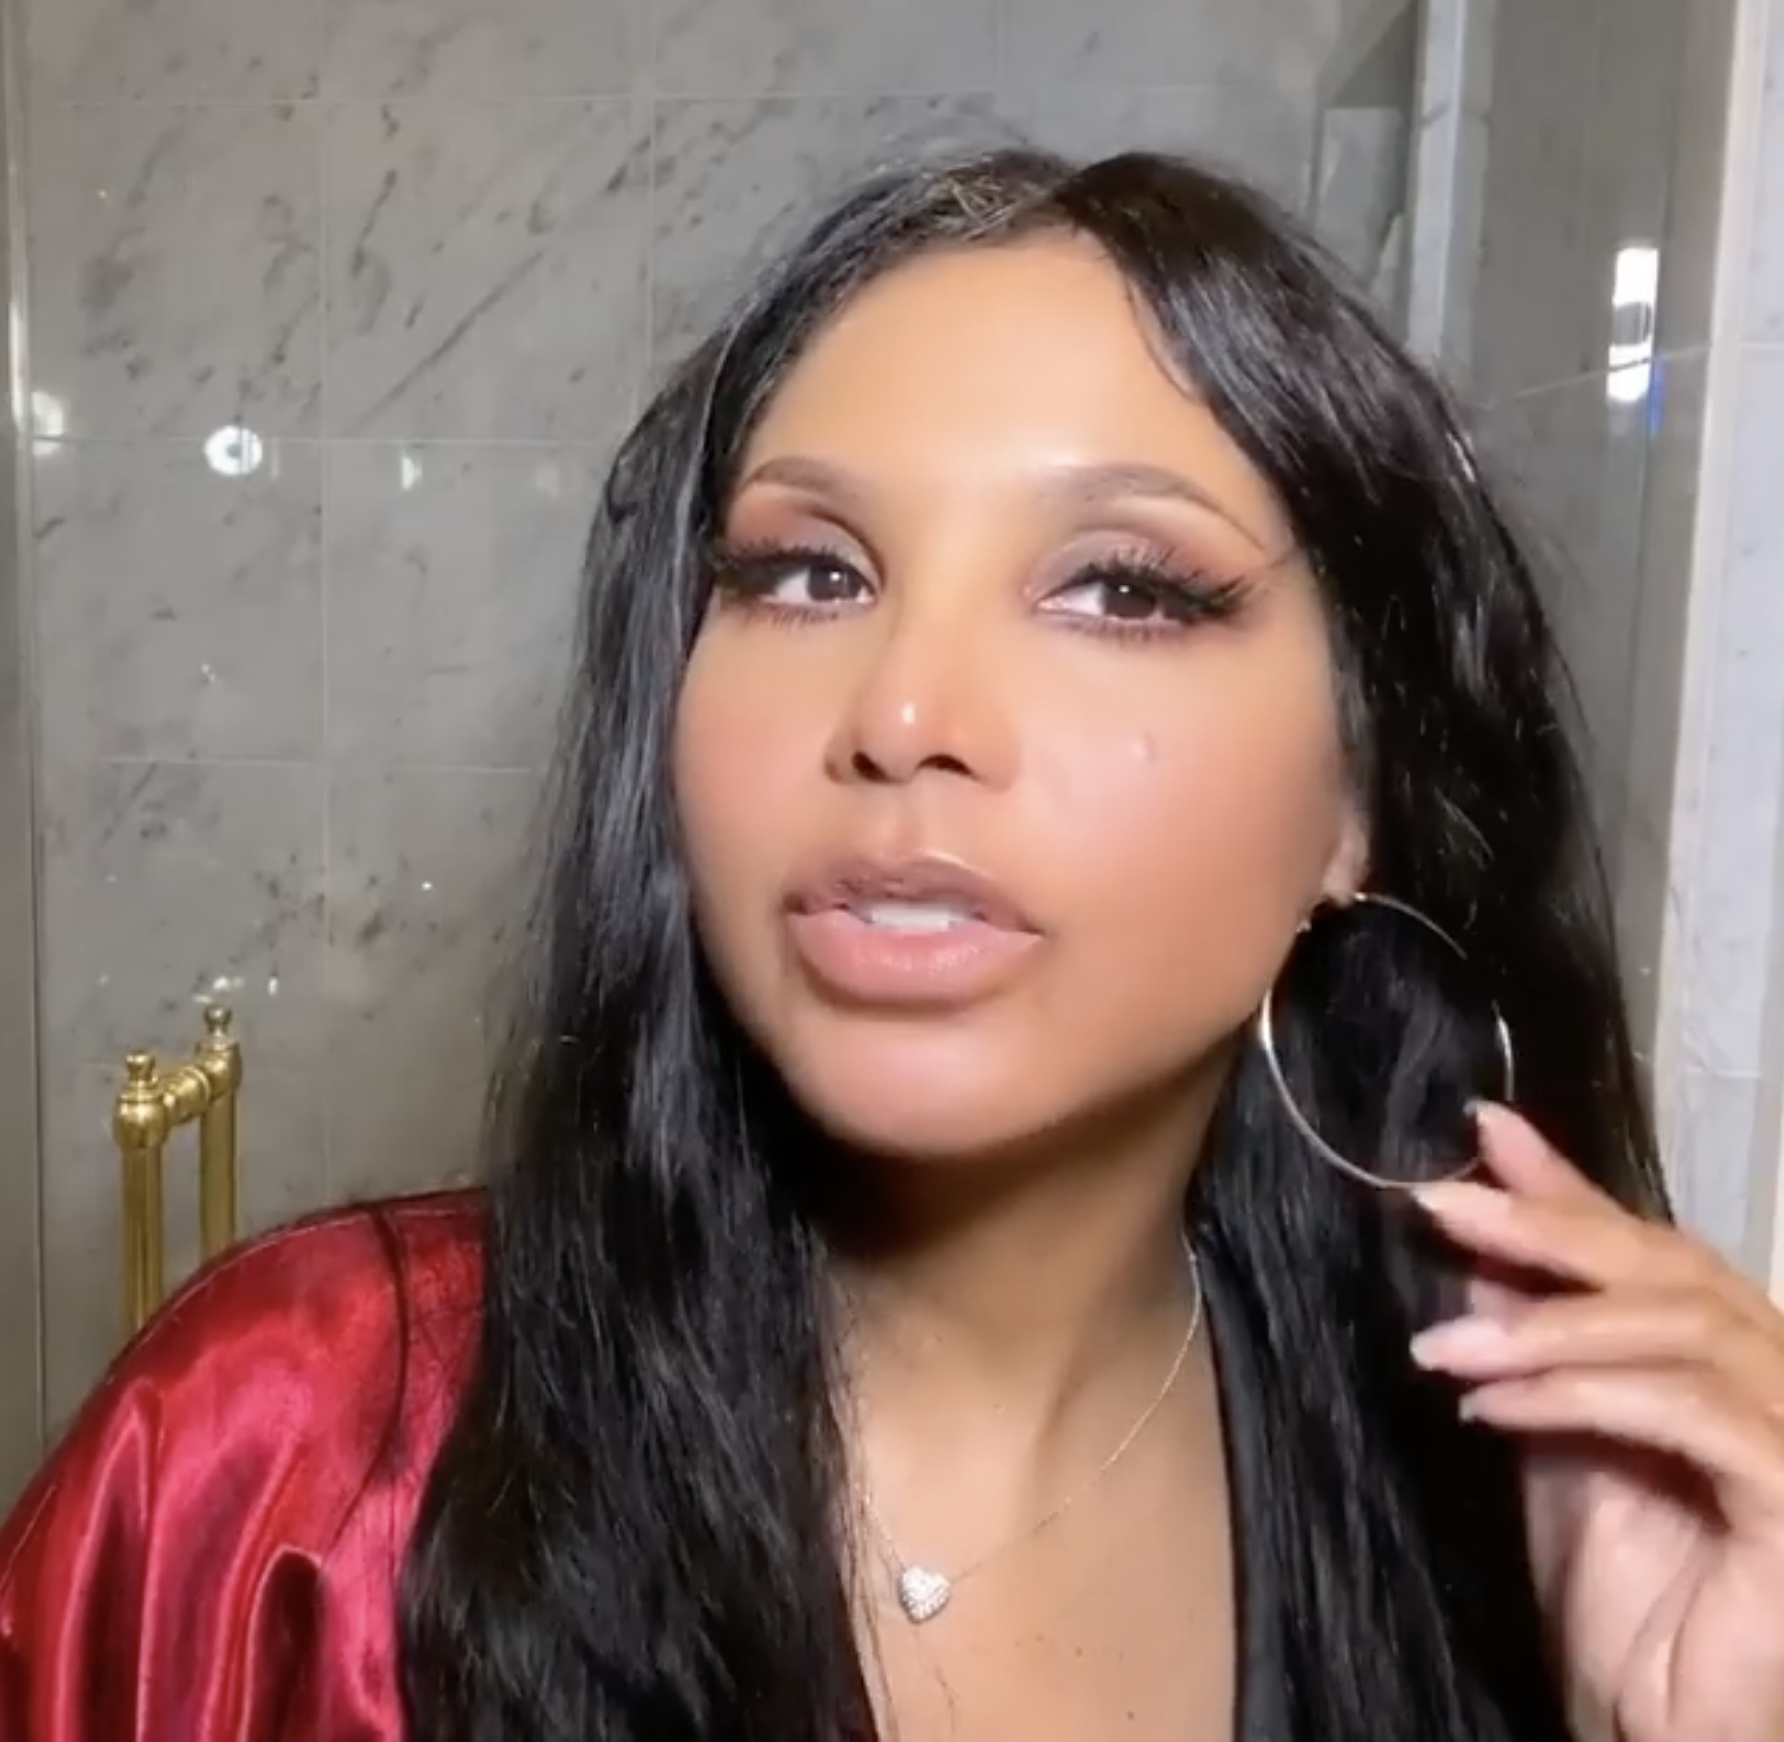 Toni Braxton shows off her earrings with makeup on her face in a red robe